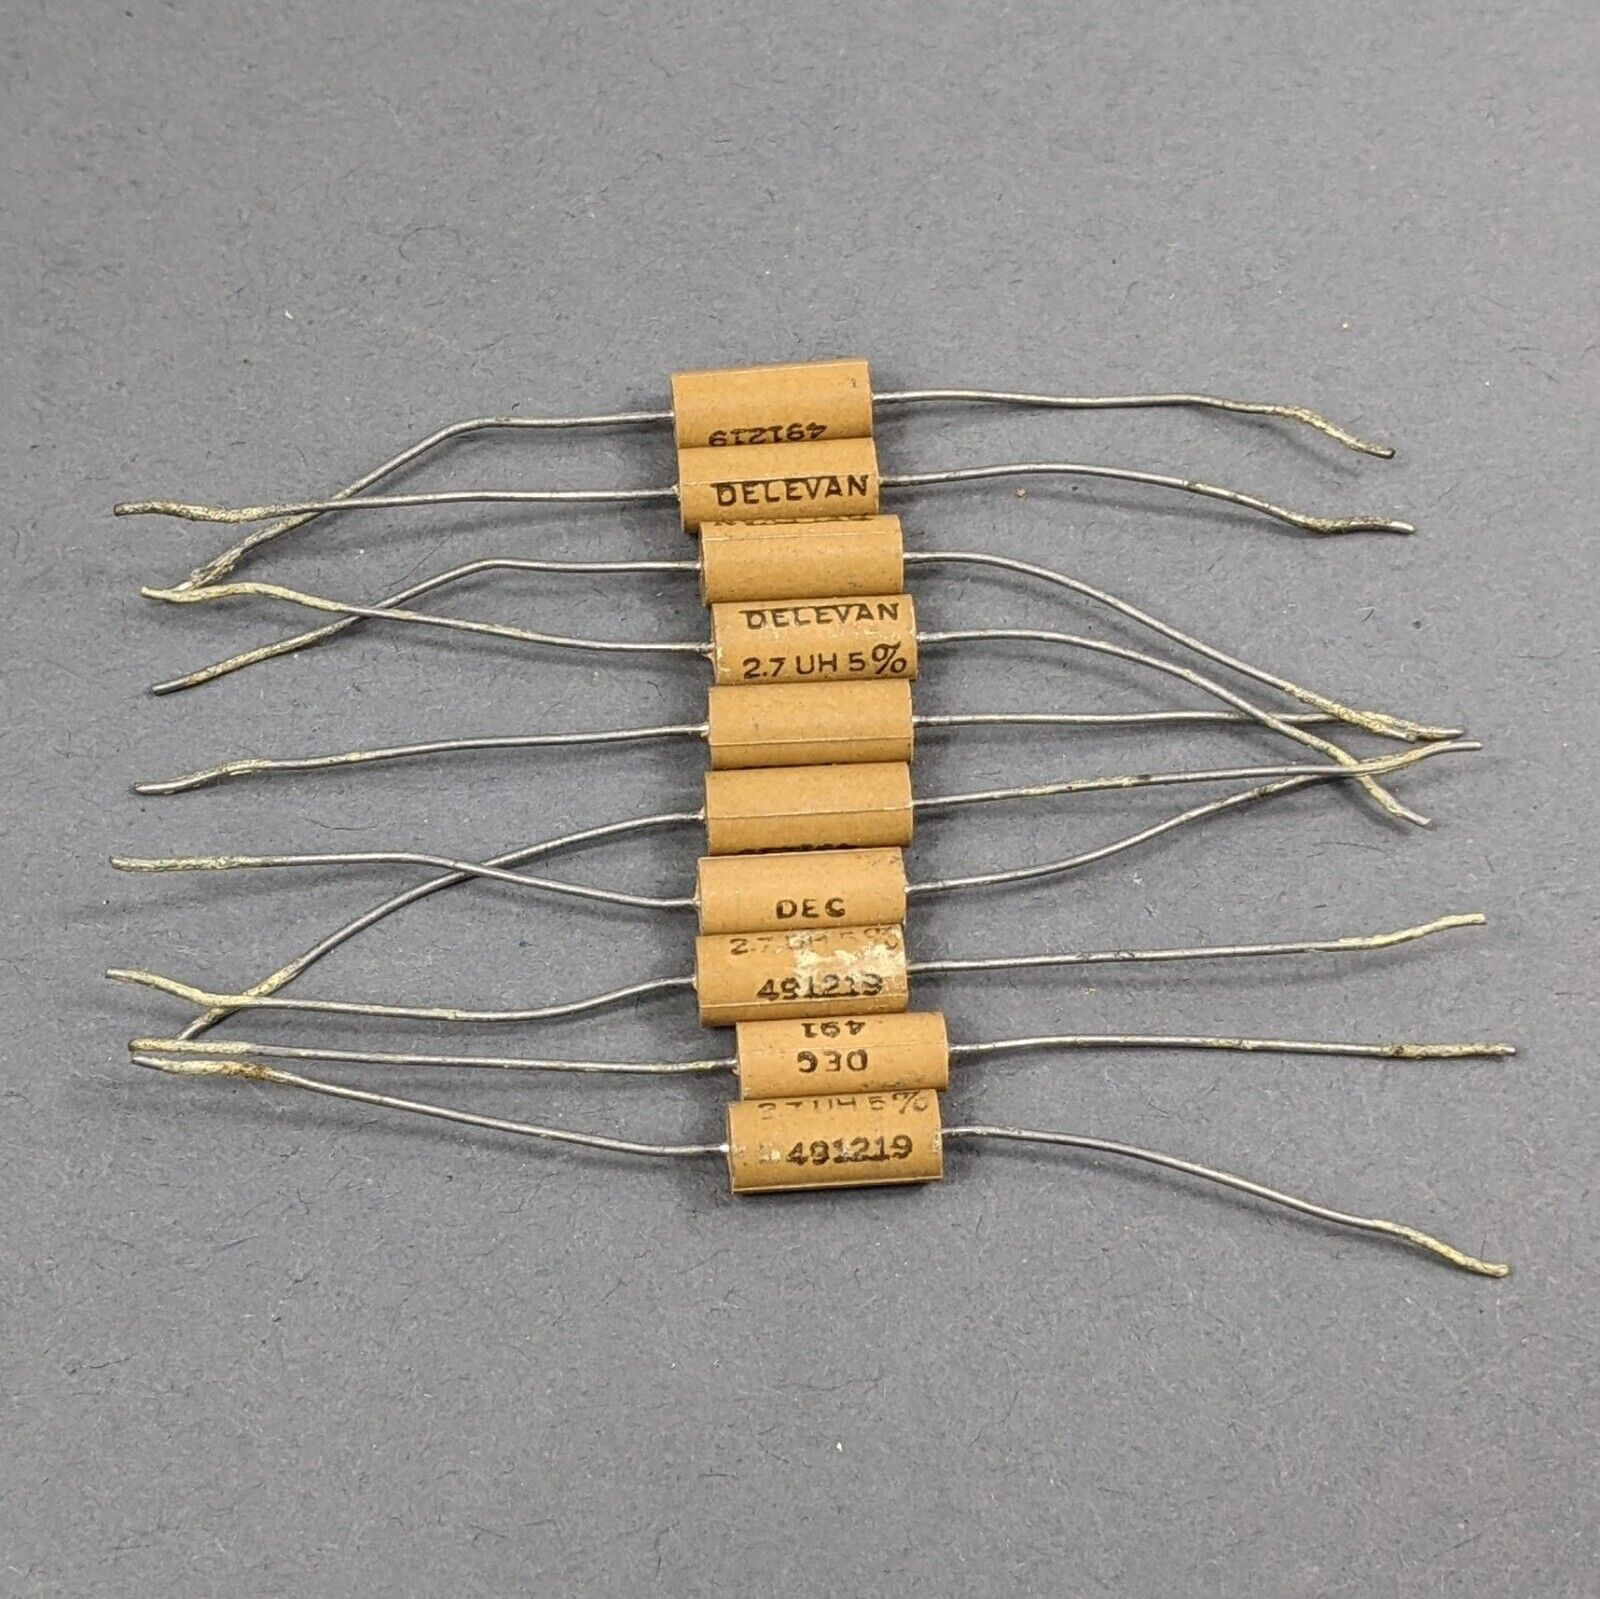 Lot of 10 Vintage 2.7 uH Choke Allen-Bradley Style 1/2W 5% Molded Inductor NOS